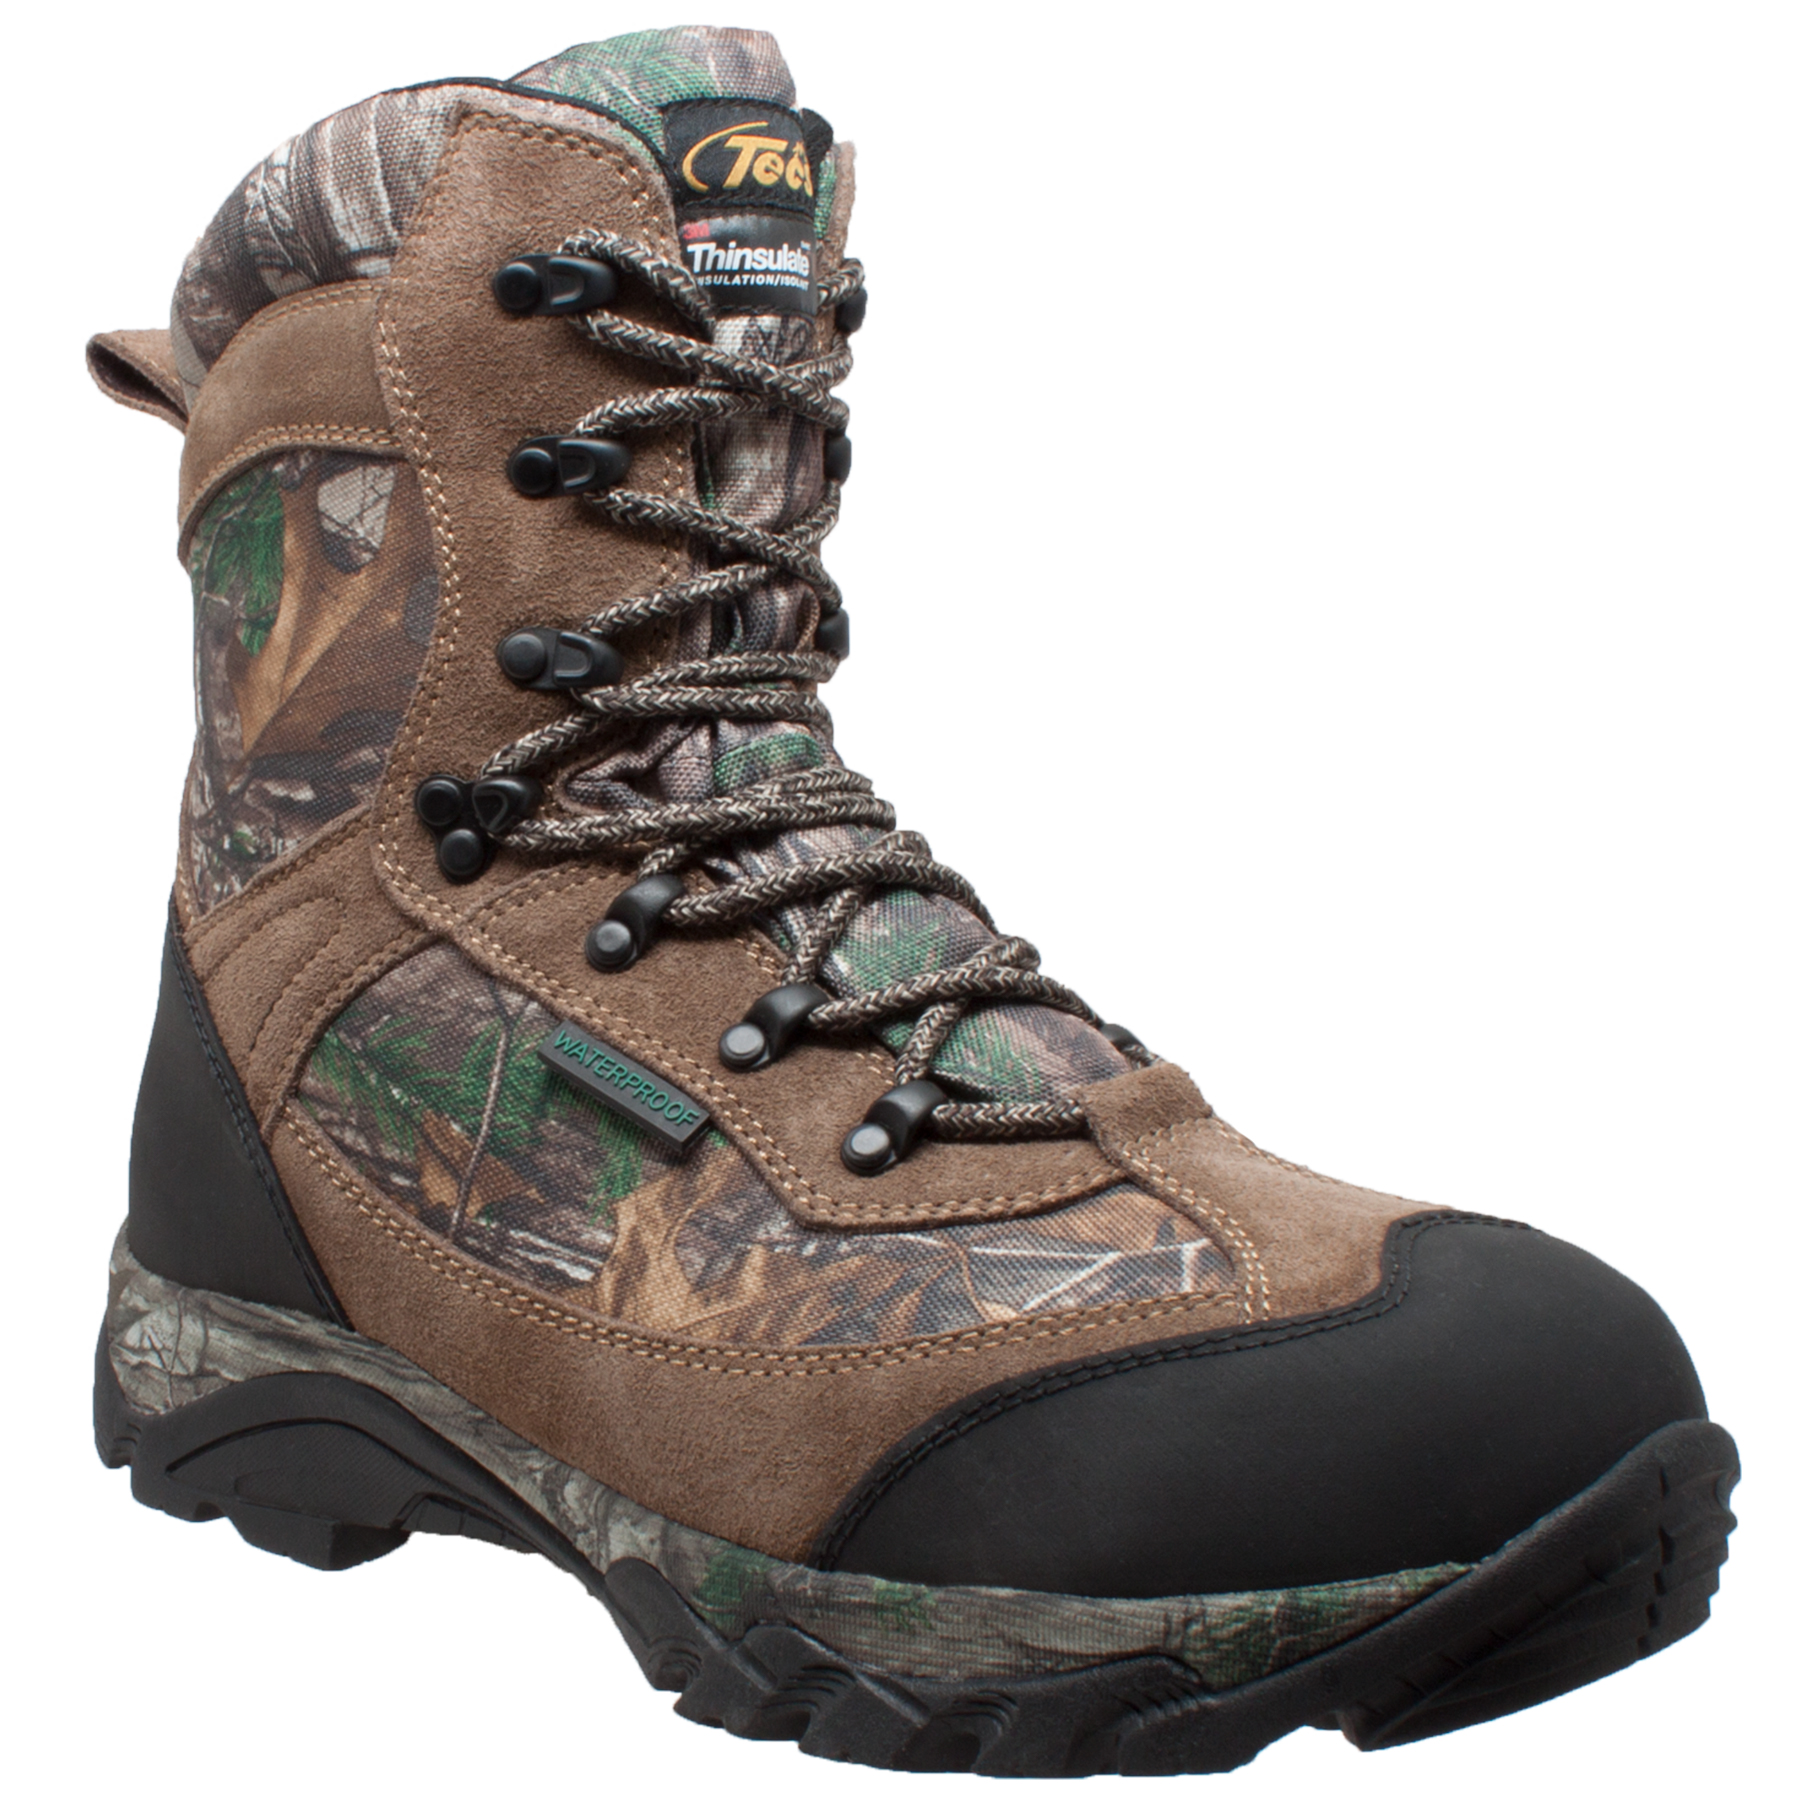 Tecs Men's 9" Waterproof Hunting Boot Wide Width Available - Real Tree&#8482; Camo